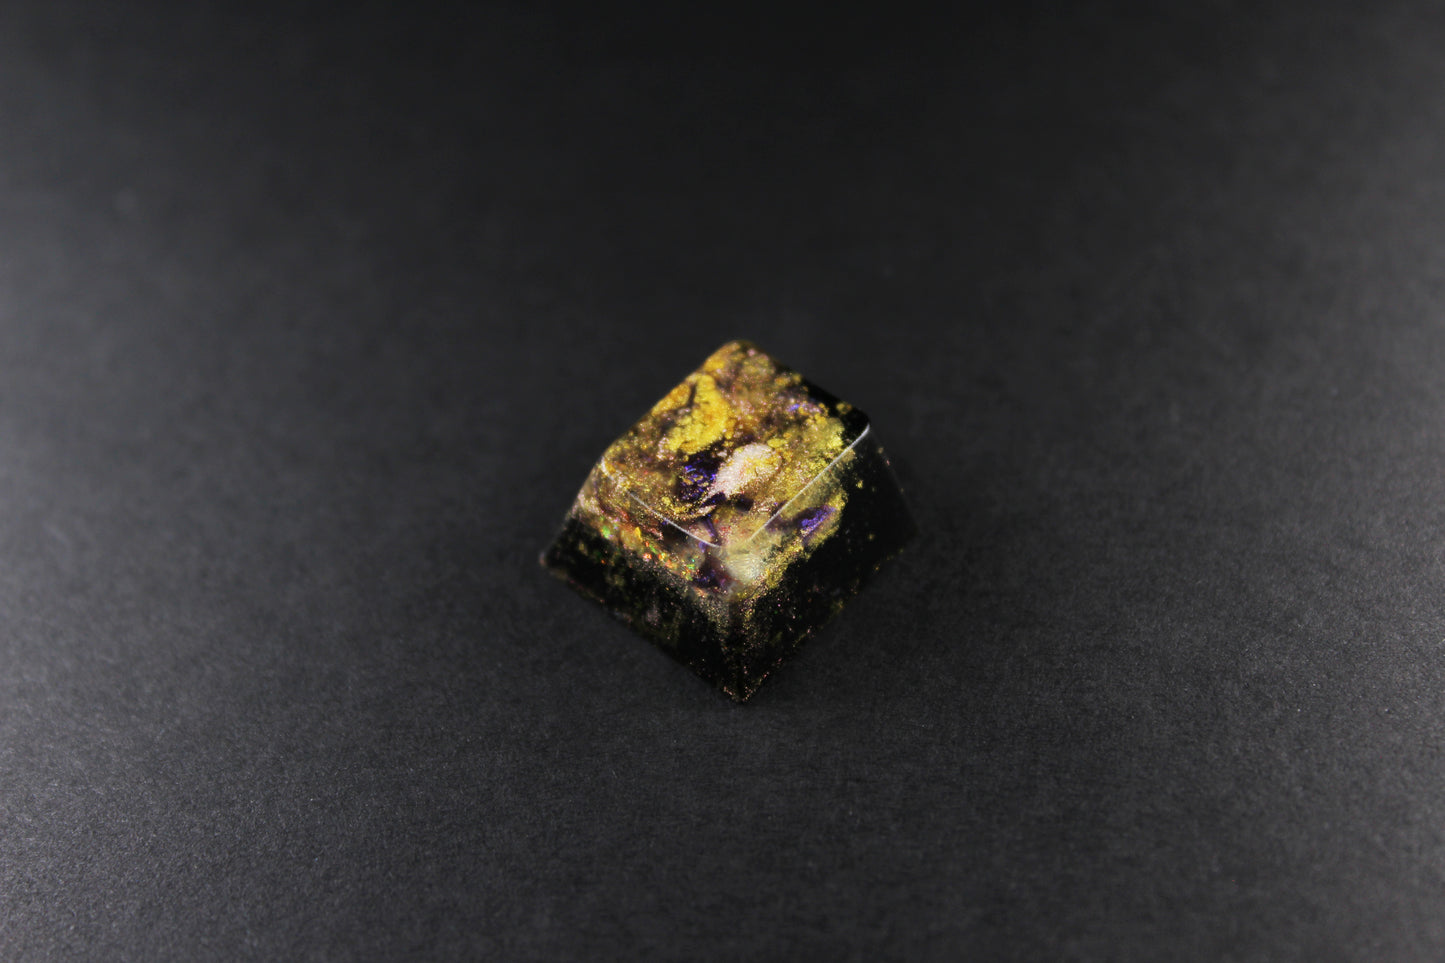 Cherry Esc- Deep Purple- 3 - PrimeCaps Keycap - Blank and Sculpted Artisan Keycaps for cherry MX mechanical keyboards 